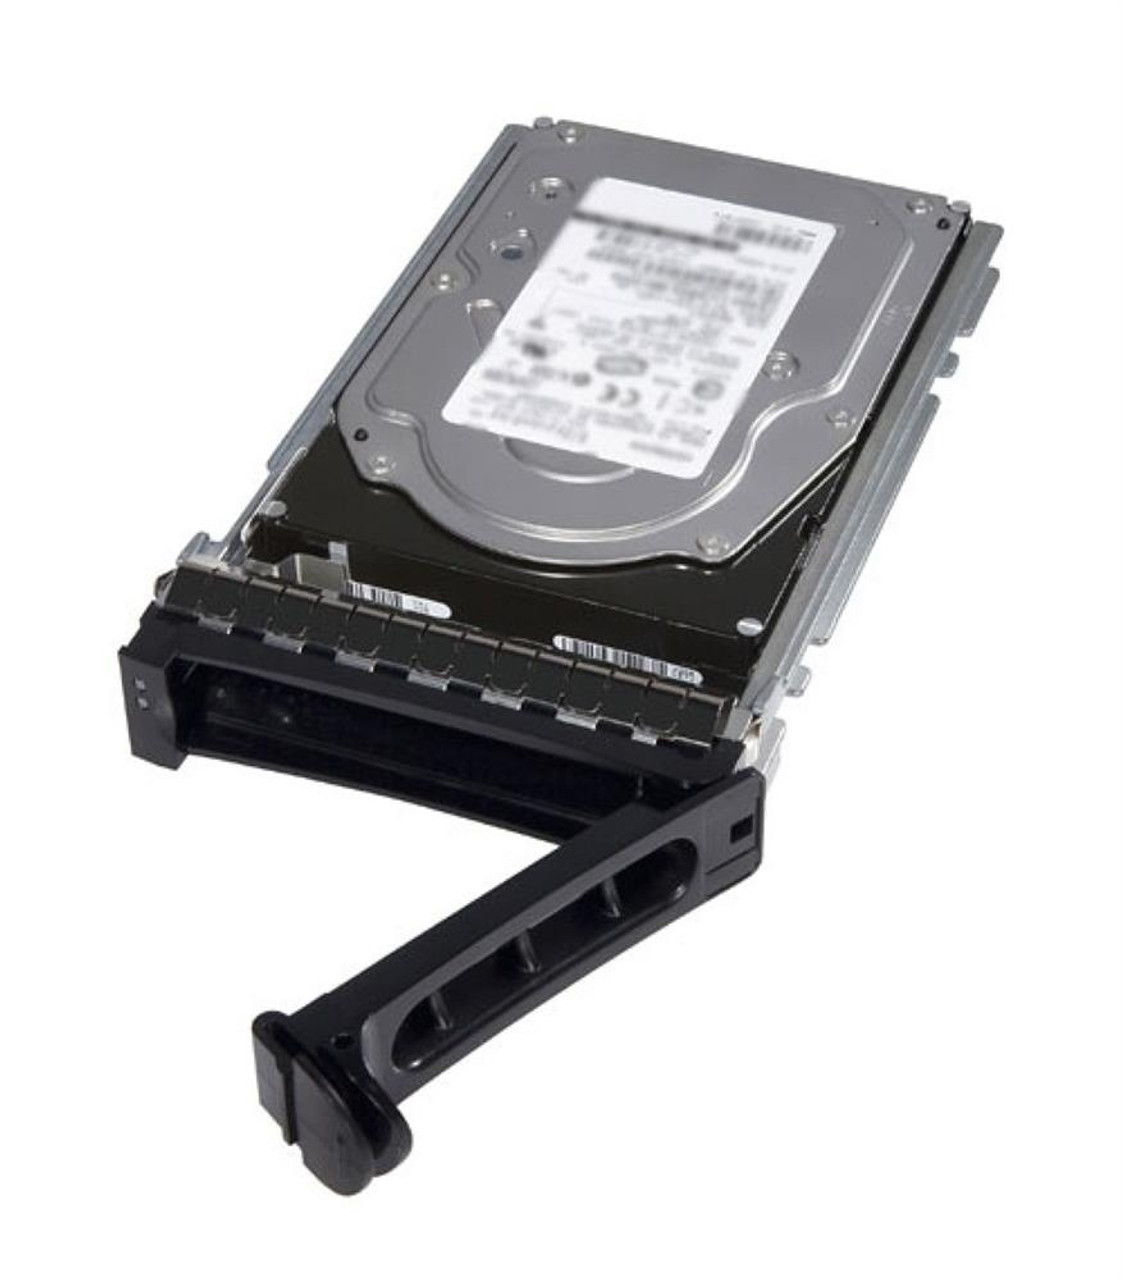 2R700-RFB Dell 73GB 10000RPM Ultra-320 SCSI 80-Pin Hot Swap 8MB Cache 3.5-inch Internal Hard Drive with Tray